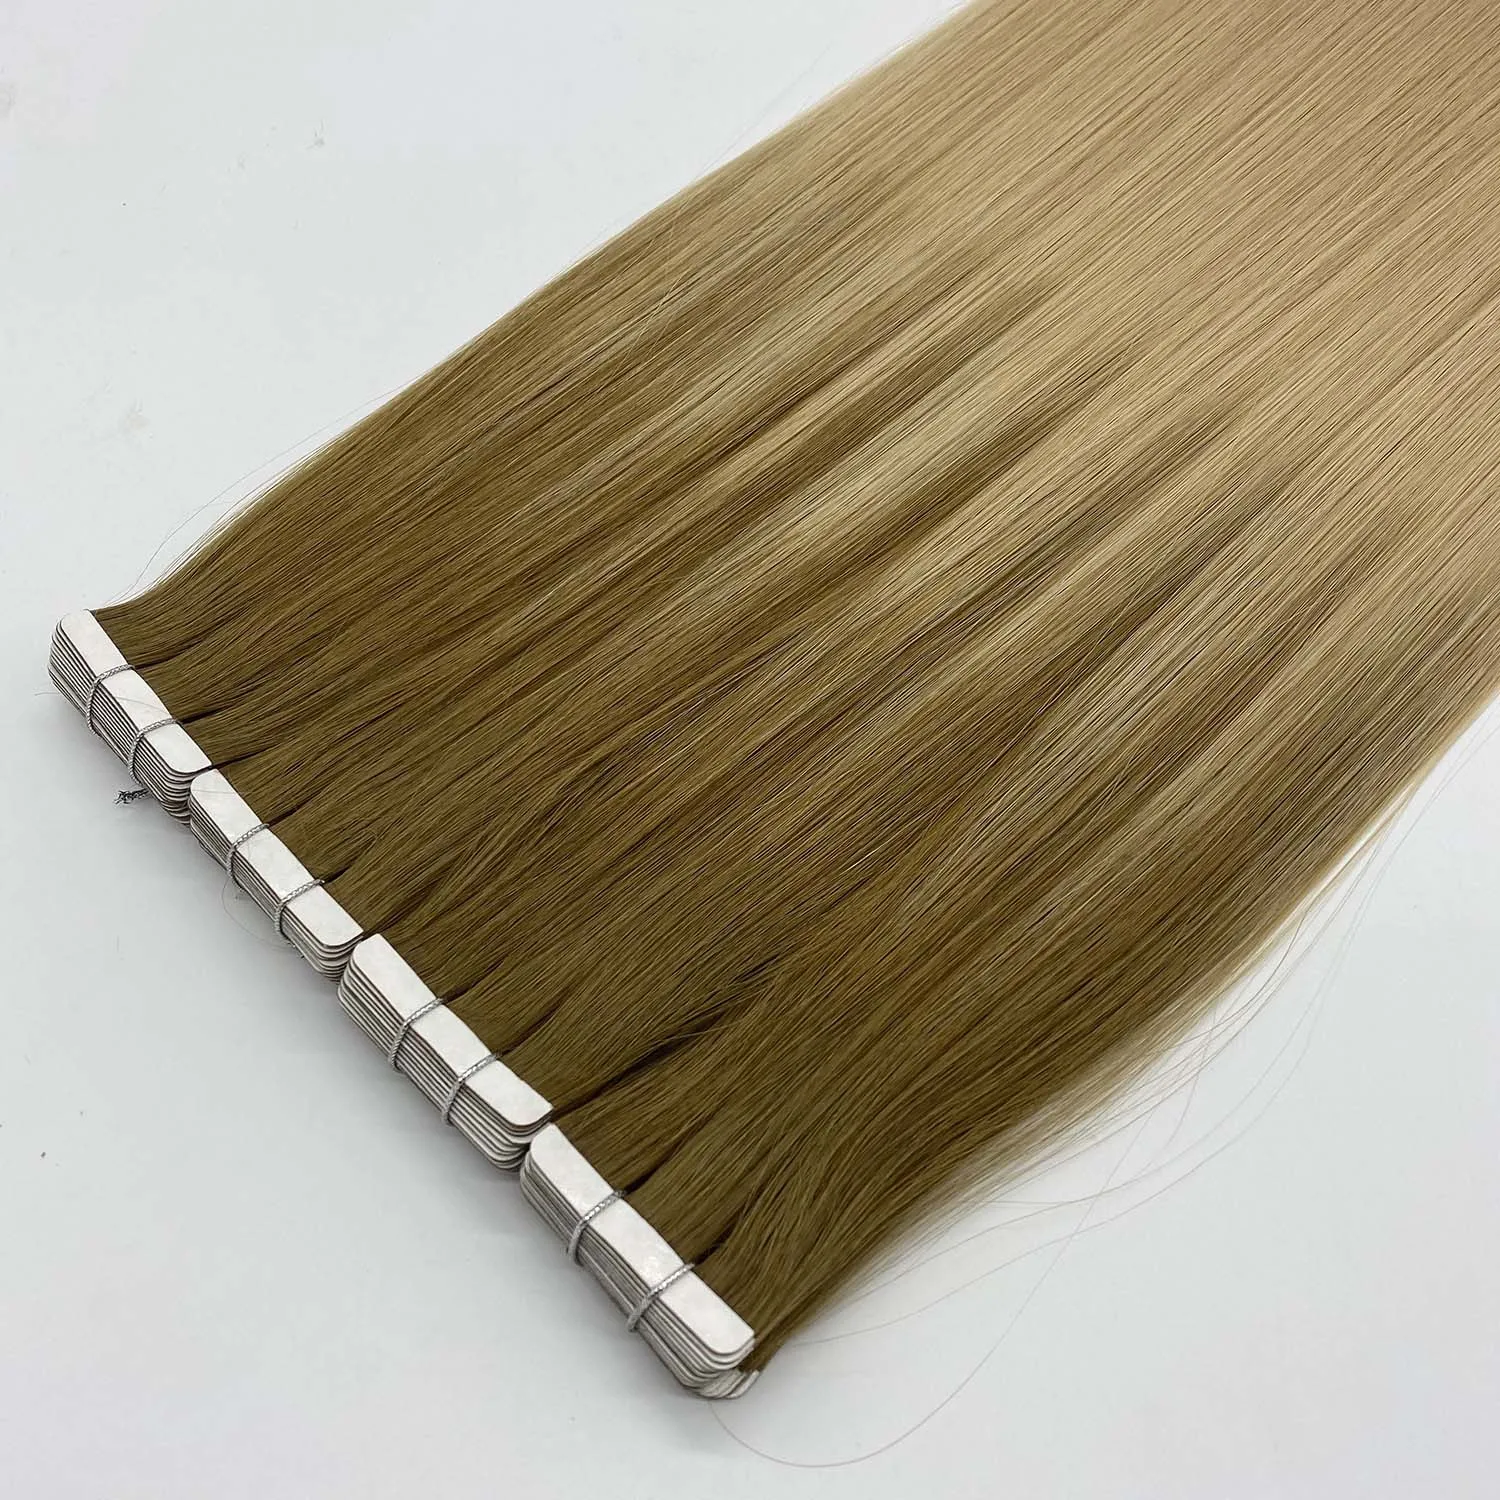 bluelucky-high-quality-balayage-color-remy-human-hair-tape-in-extensions-straight-25g-piece-20-pcs-lot